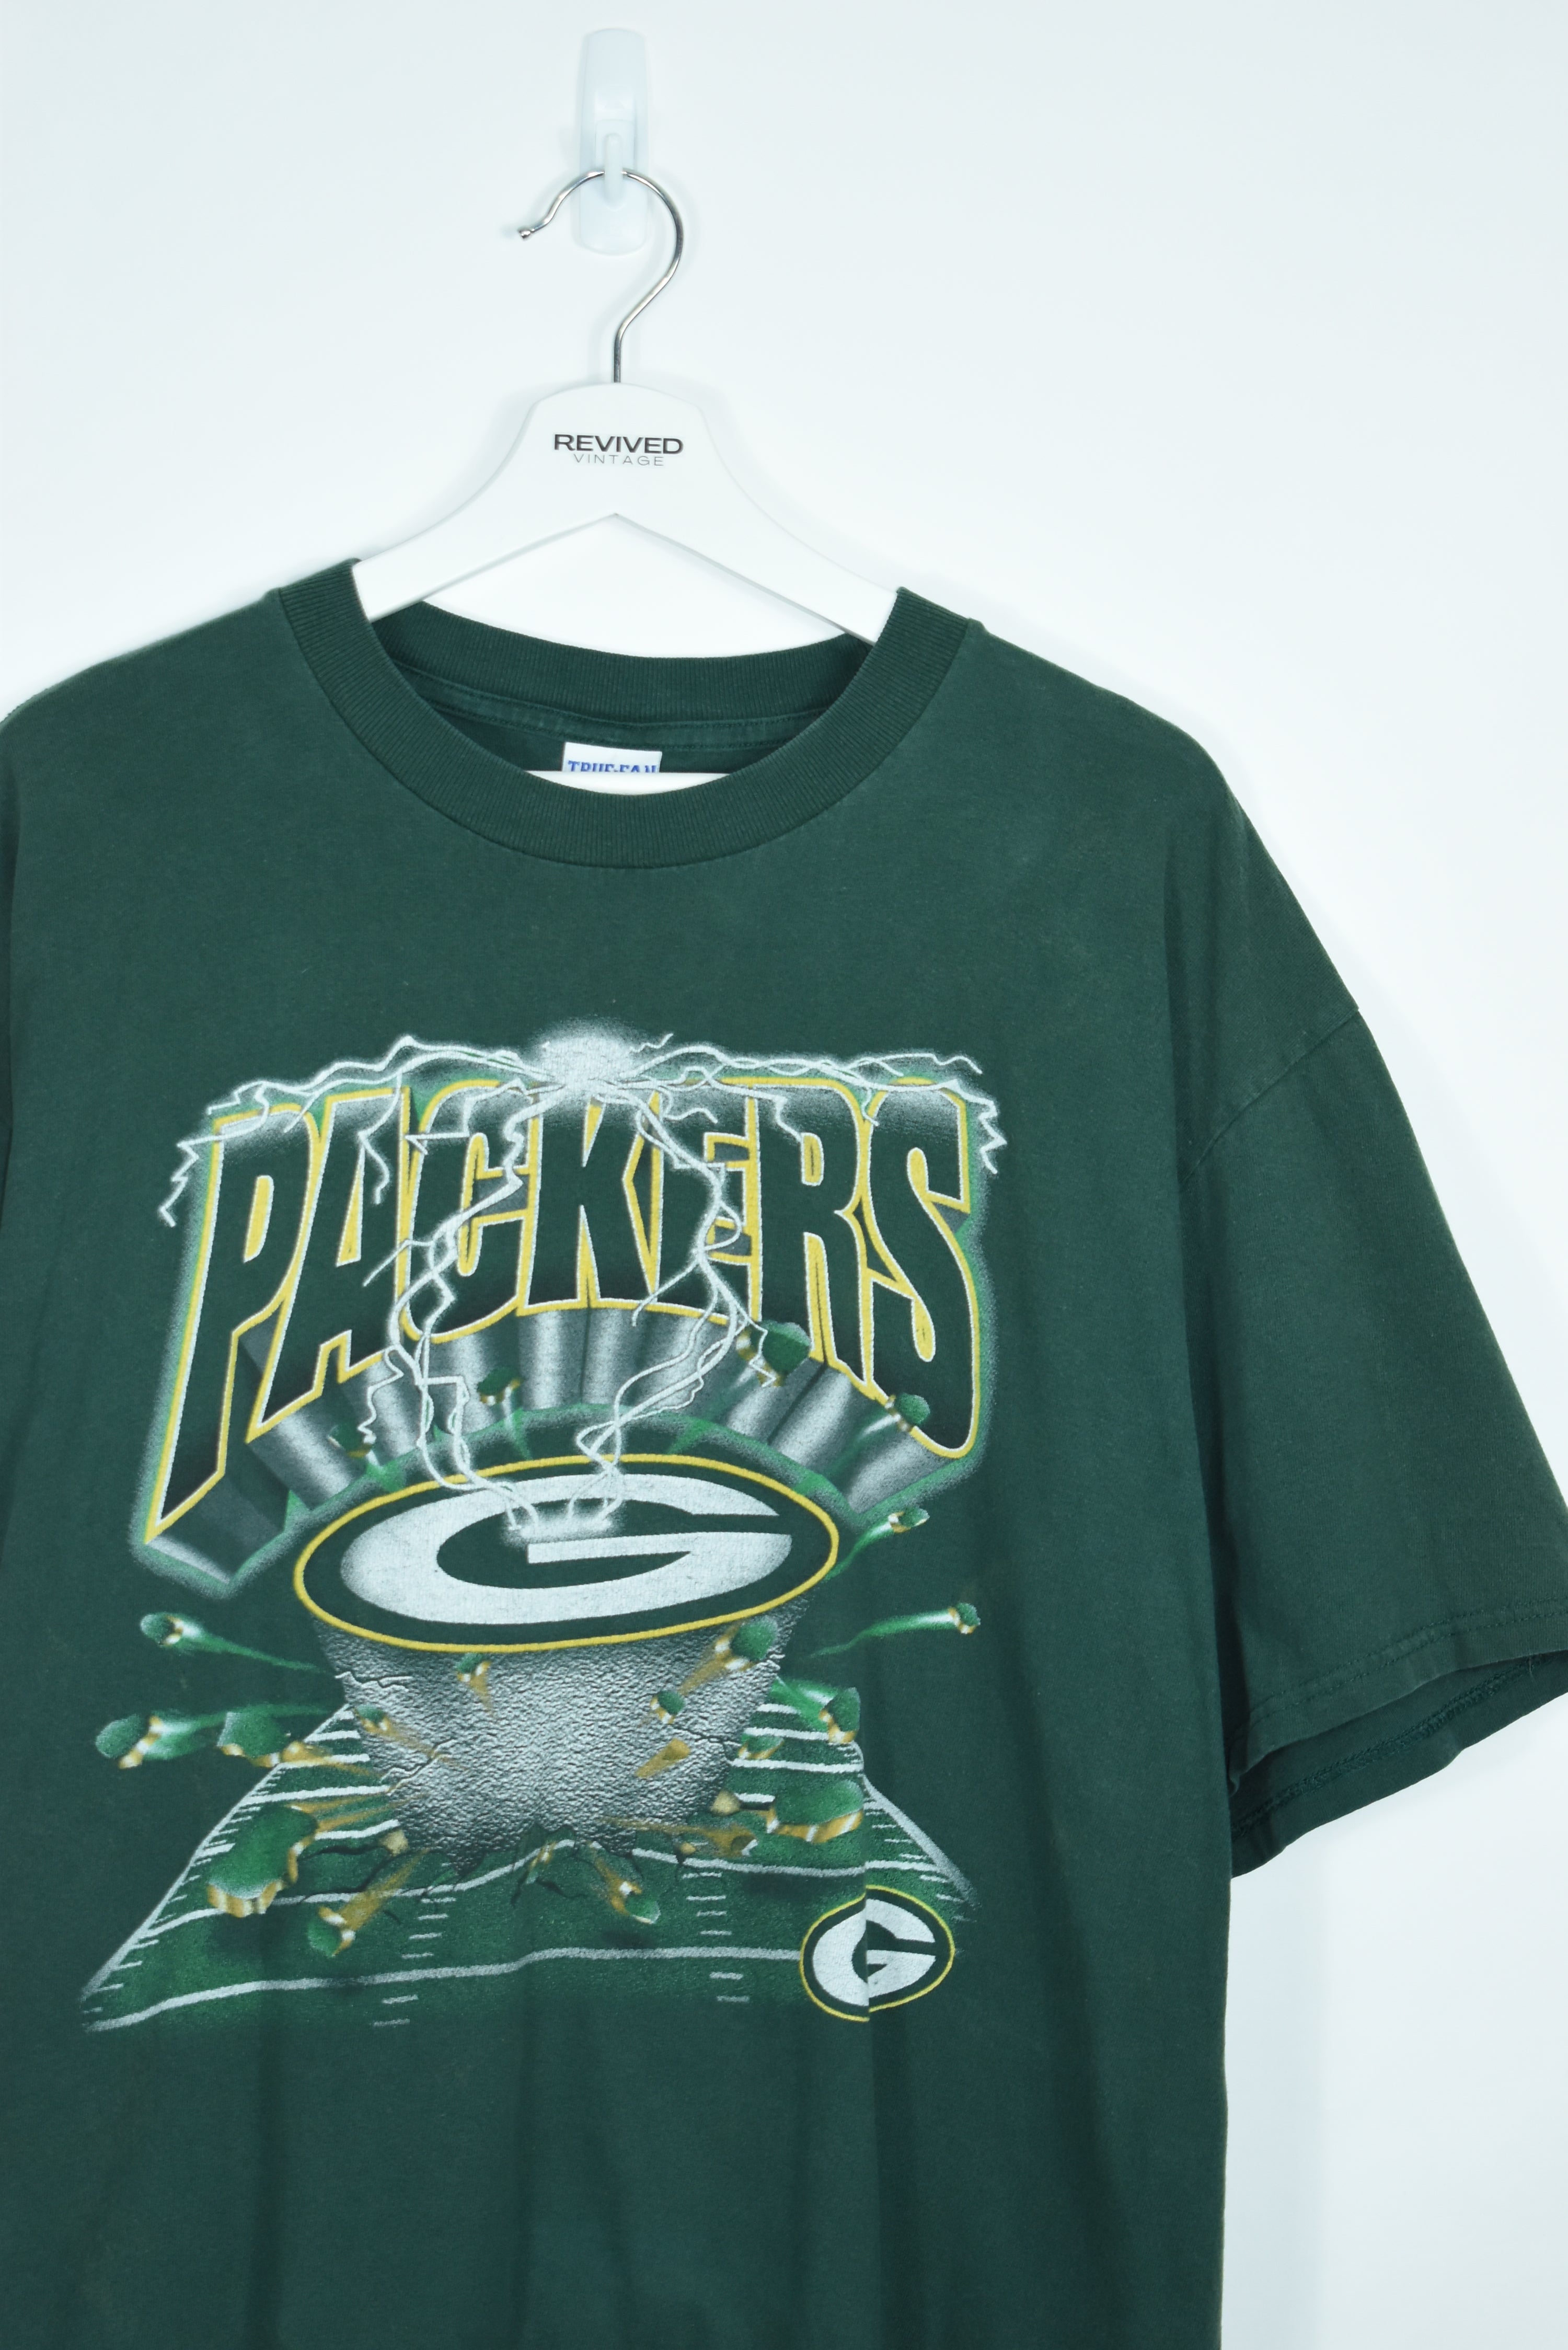 Vintage Green Bay Packers T Shirt Xlarge